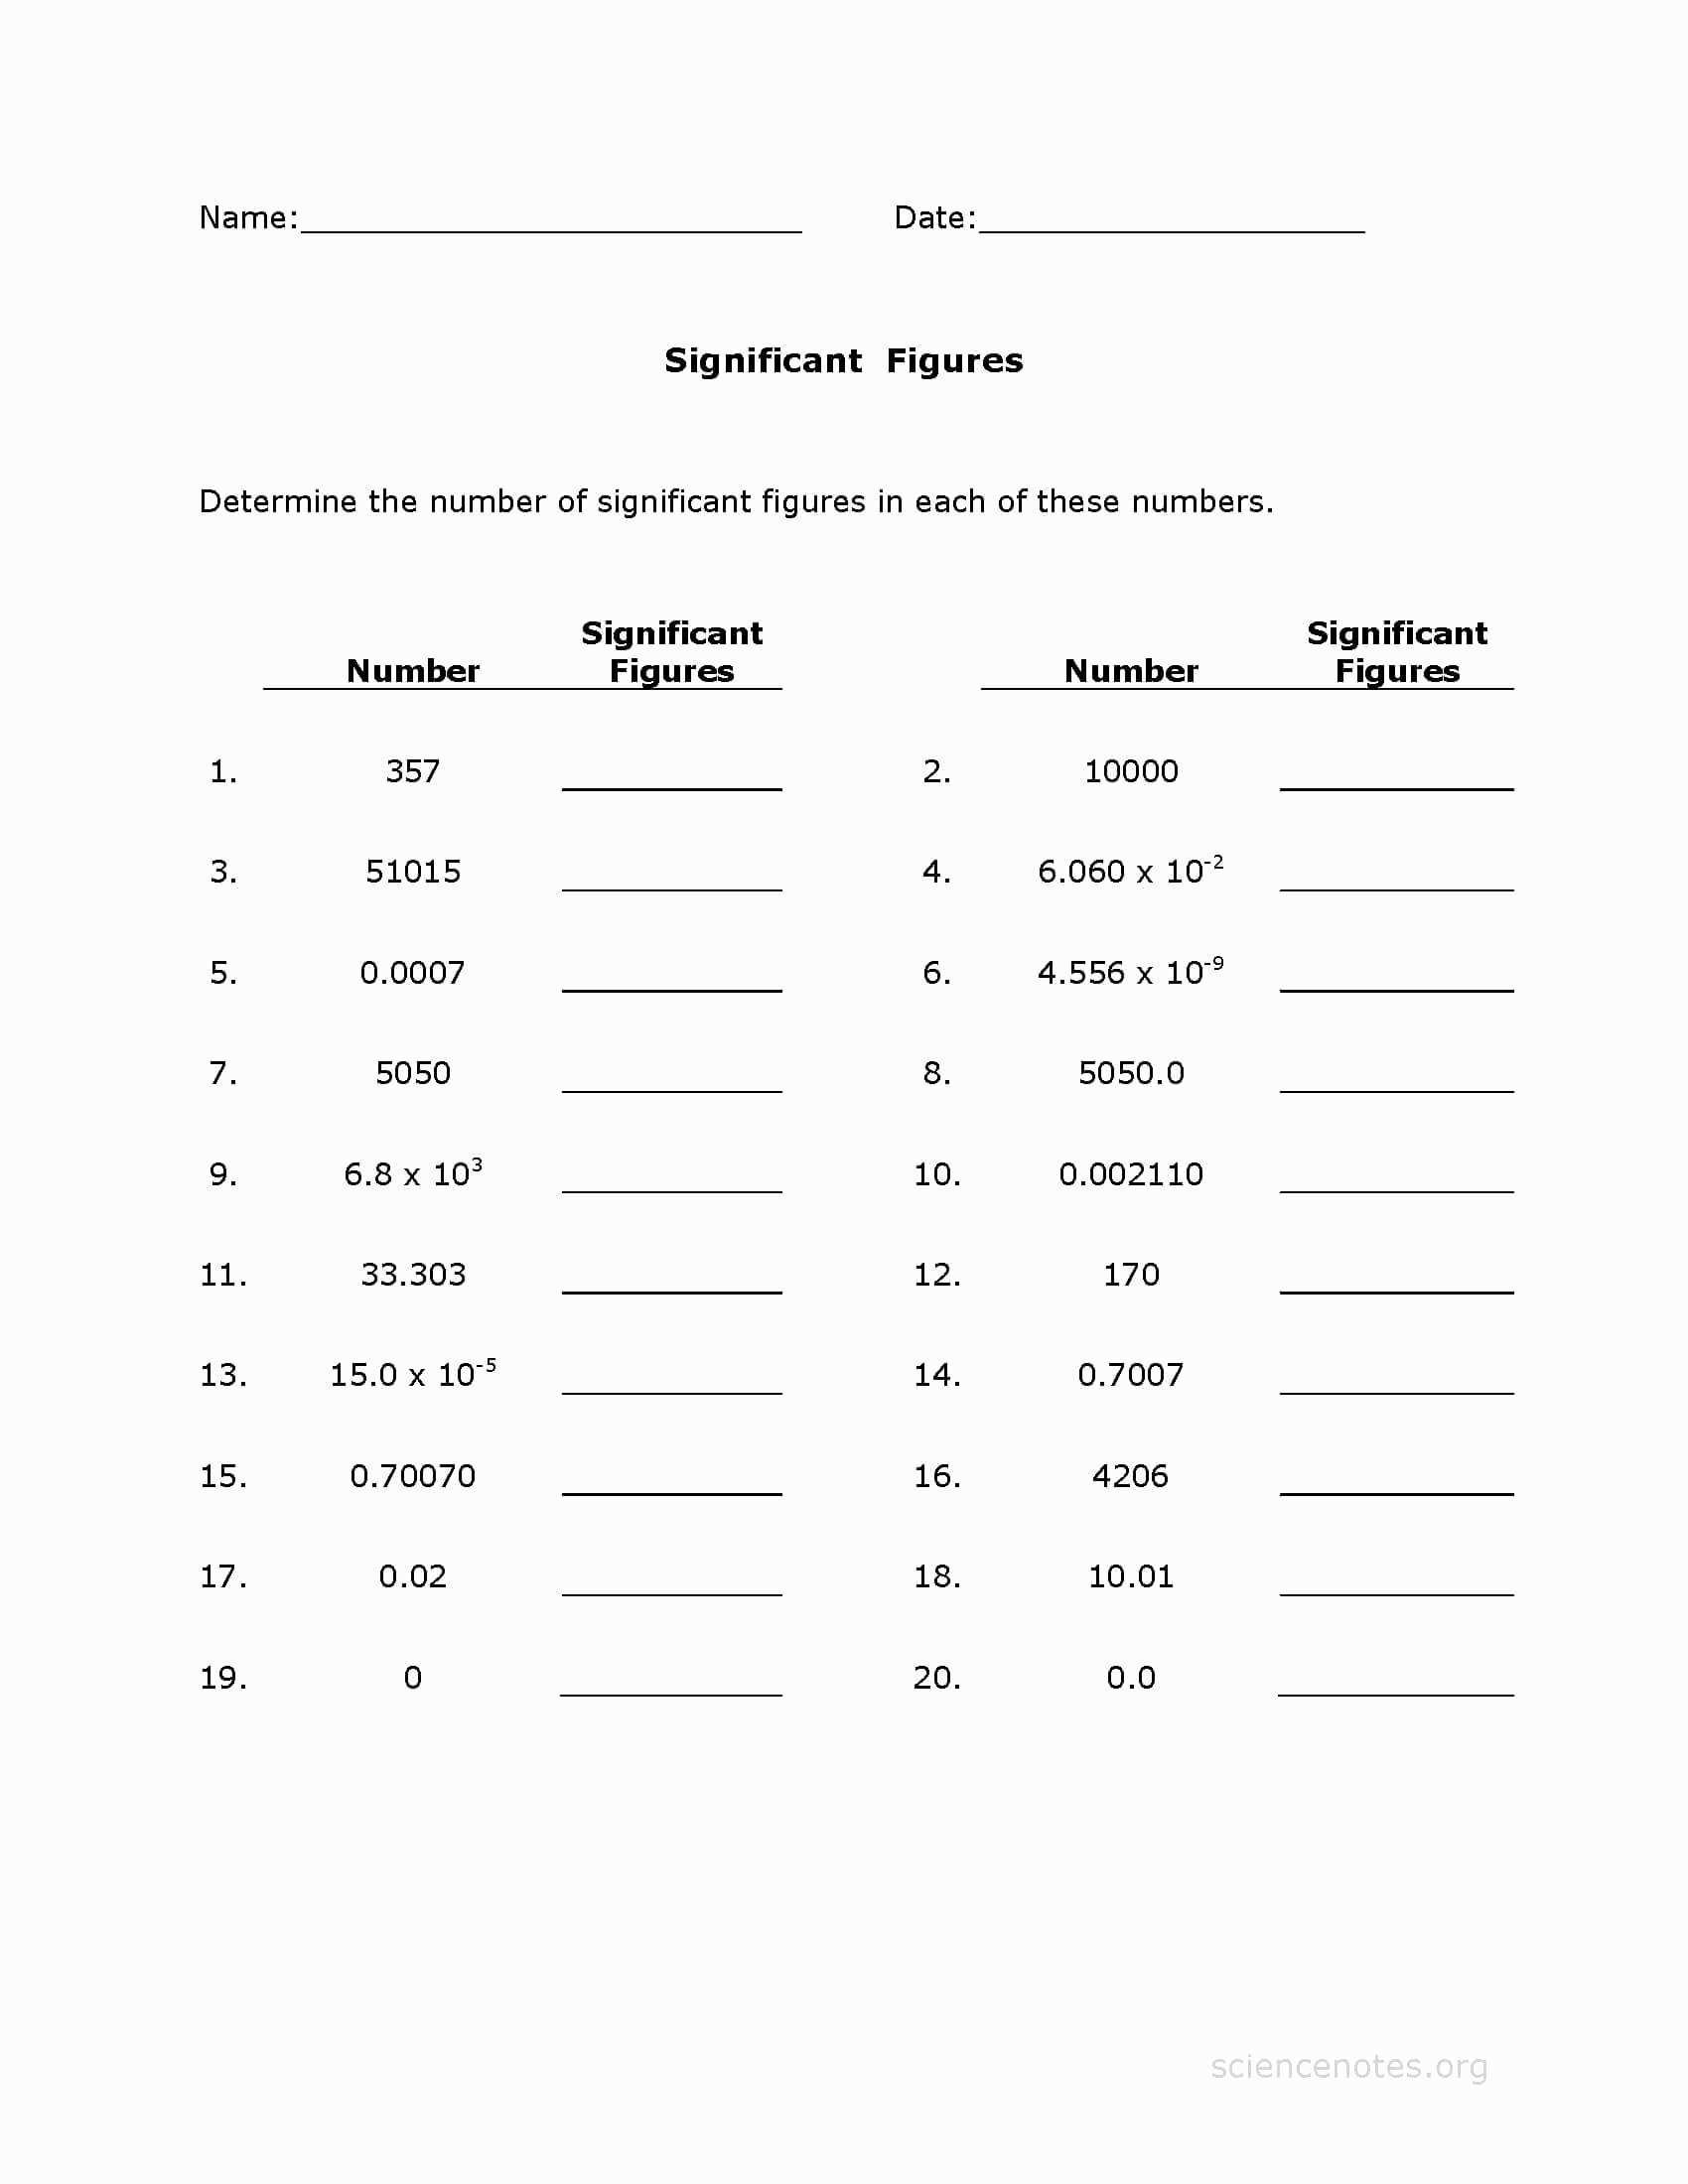 Subject Pronouns In Spanish Worksheet Answers  Briefencounters Together With Subject Pronouns In Spanish Worksheet Answers